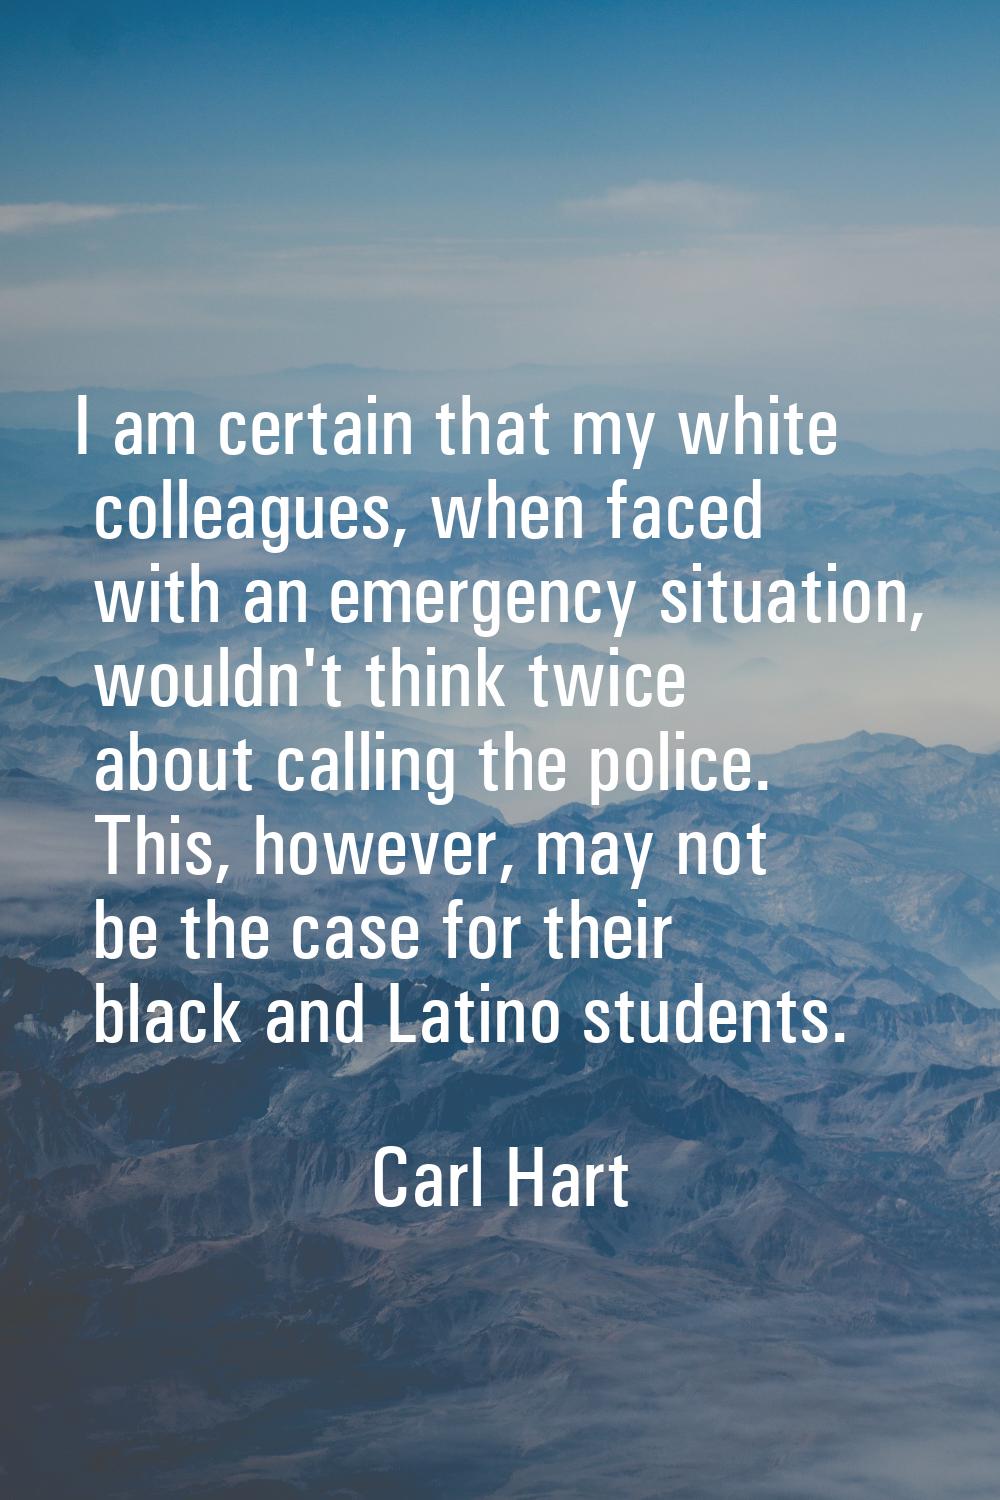 I am certain that my white colleagues, when faced with an emergency situation, wouldn't think twice